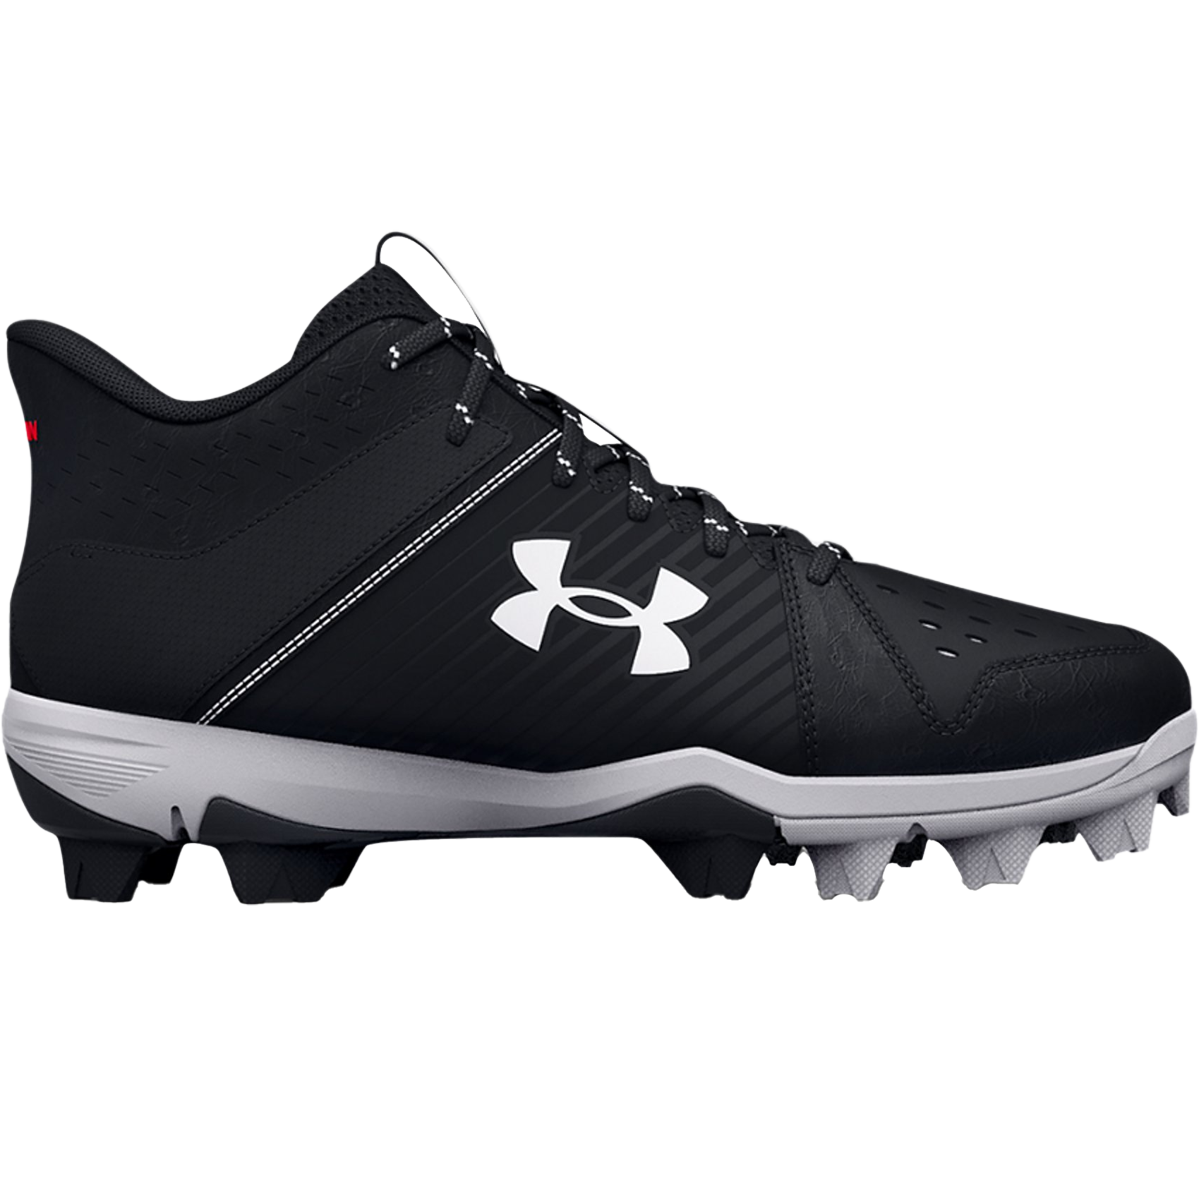 Youth Leadoff Mid RM Baseball Cleats alternate view